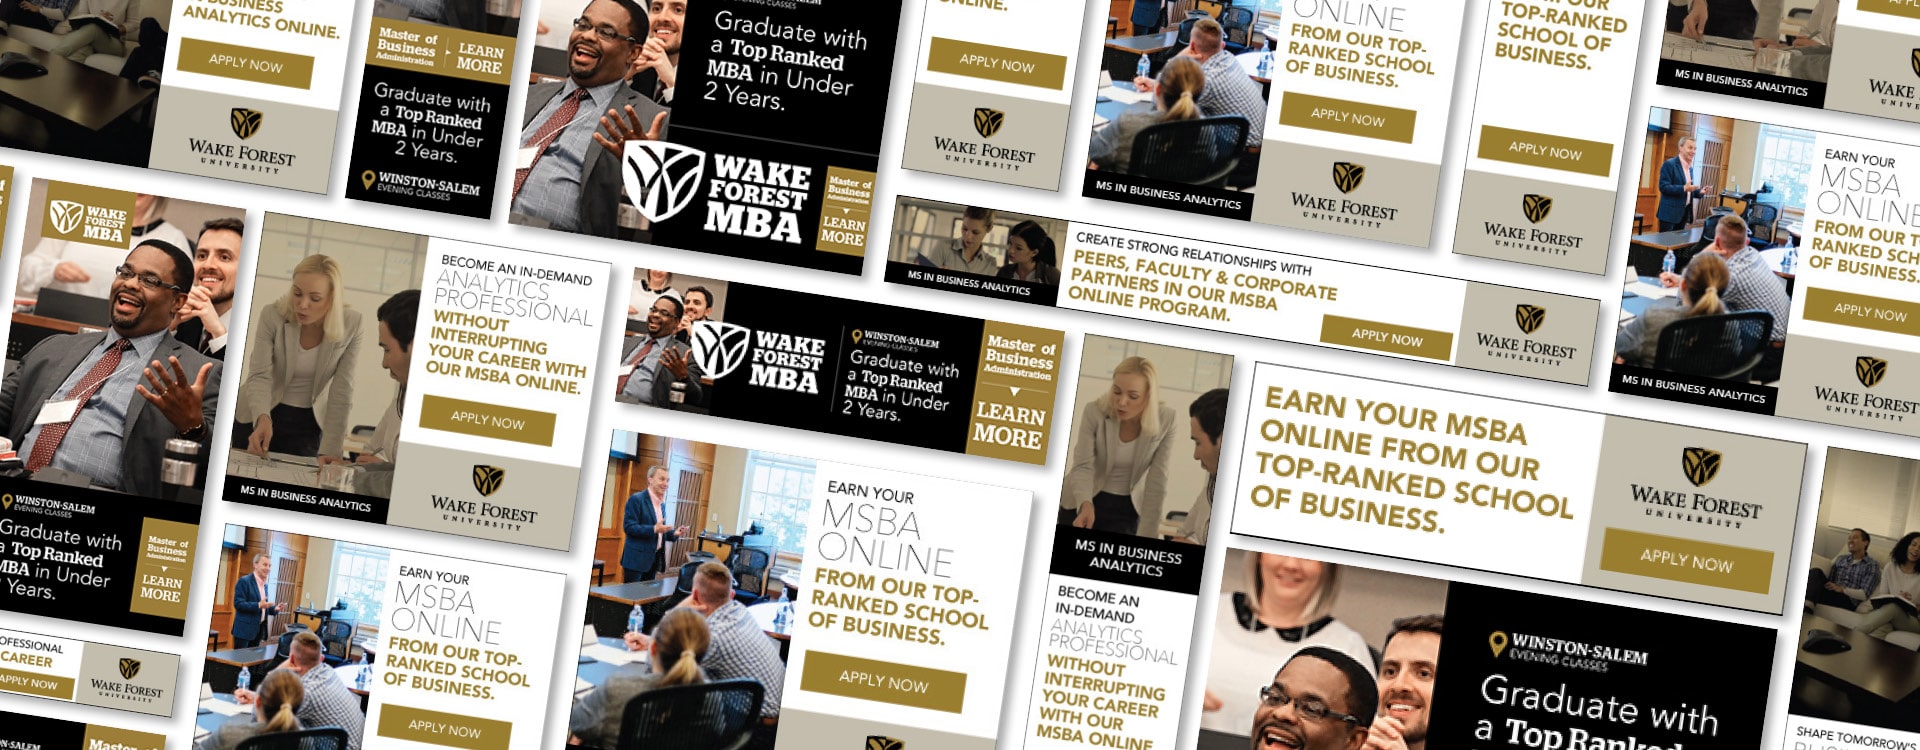 Wake Forest University School of Business Case Study